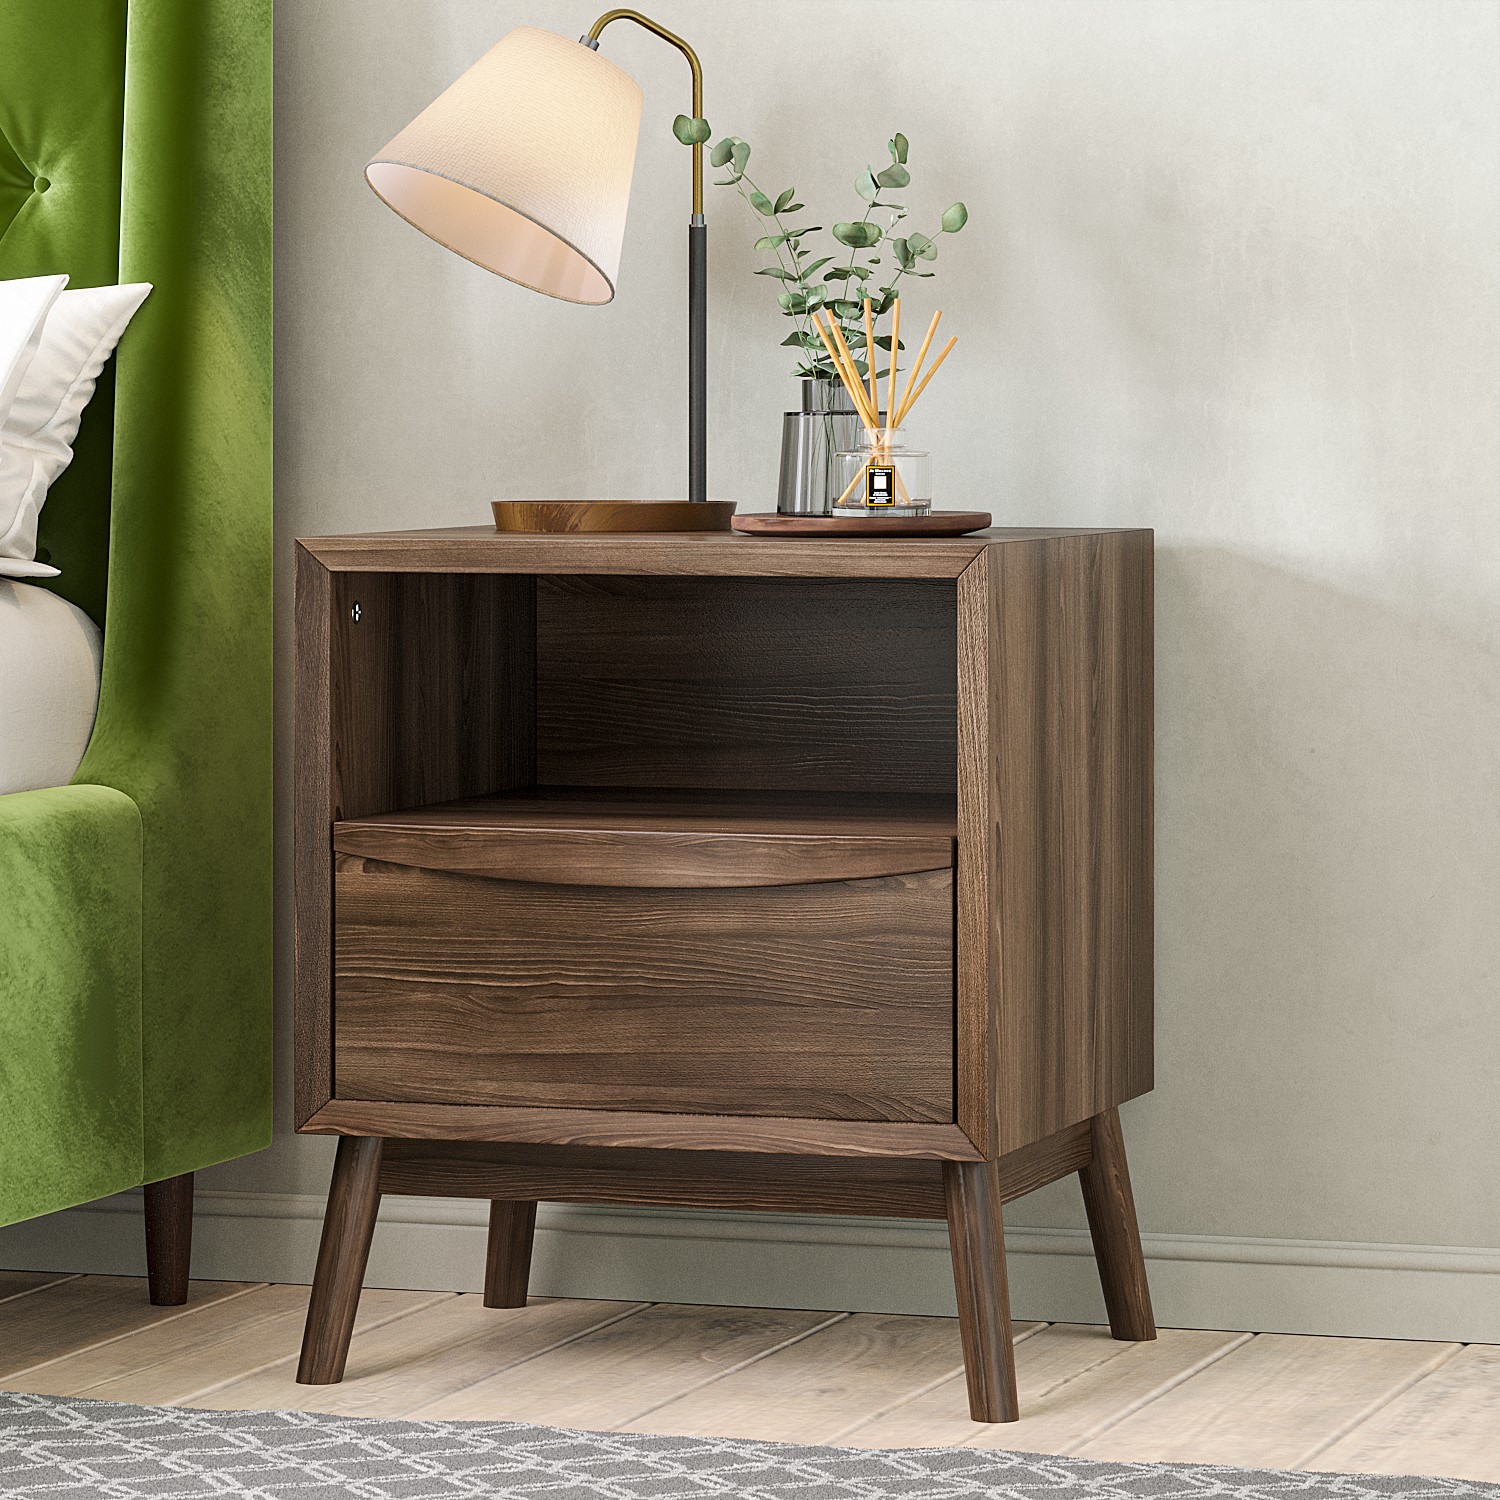 Photo of Walnut mid-century bedside table with drawer - frances